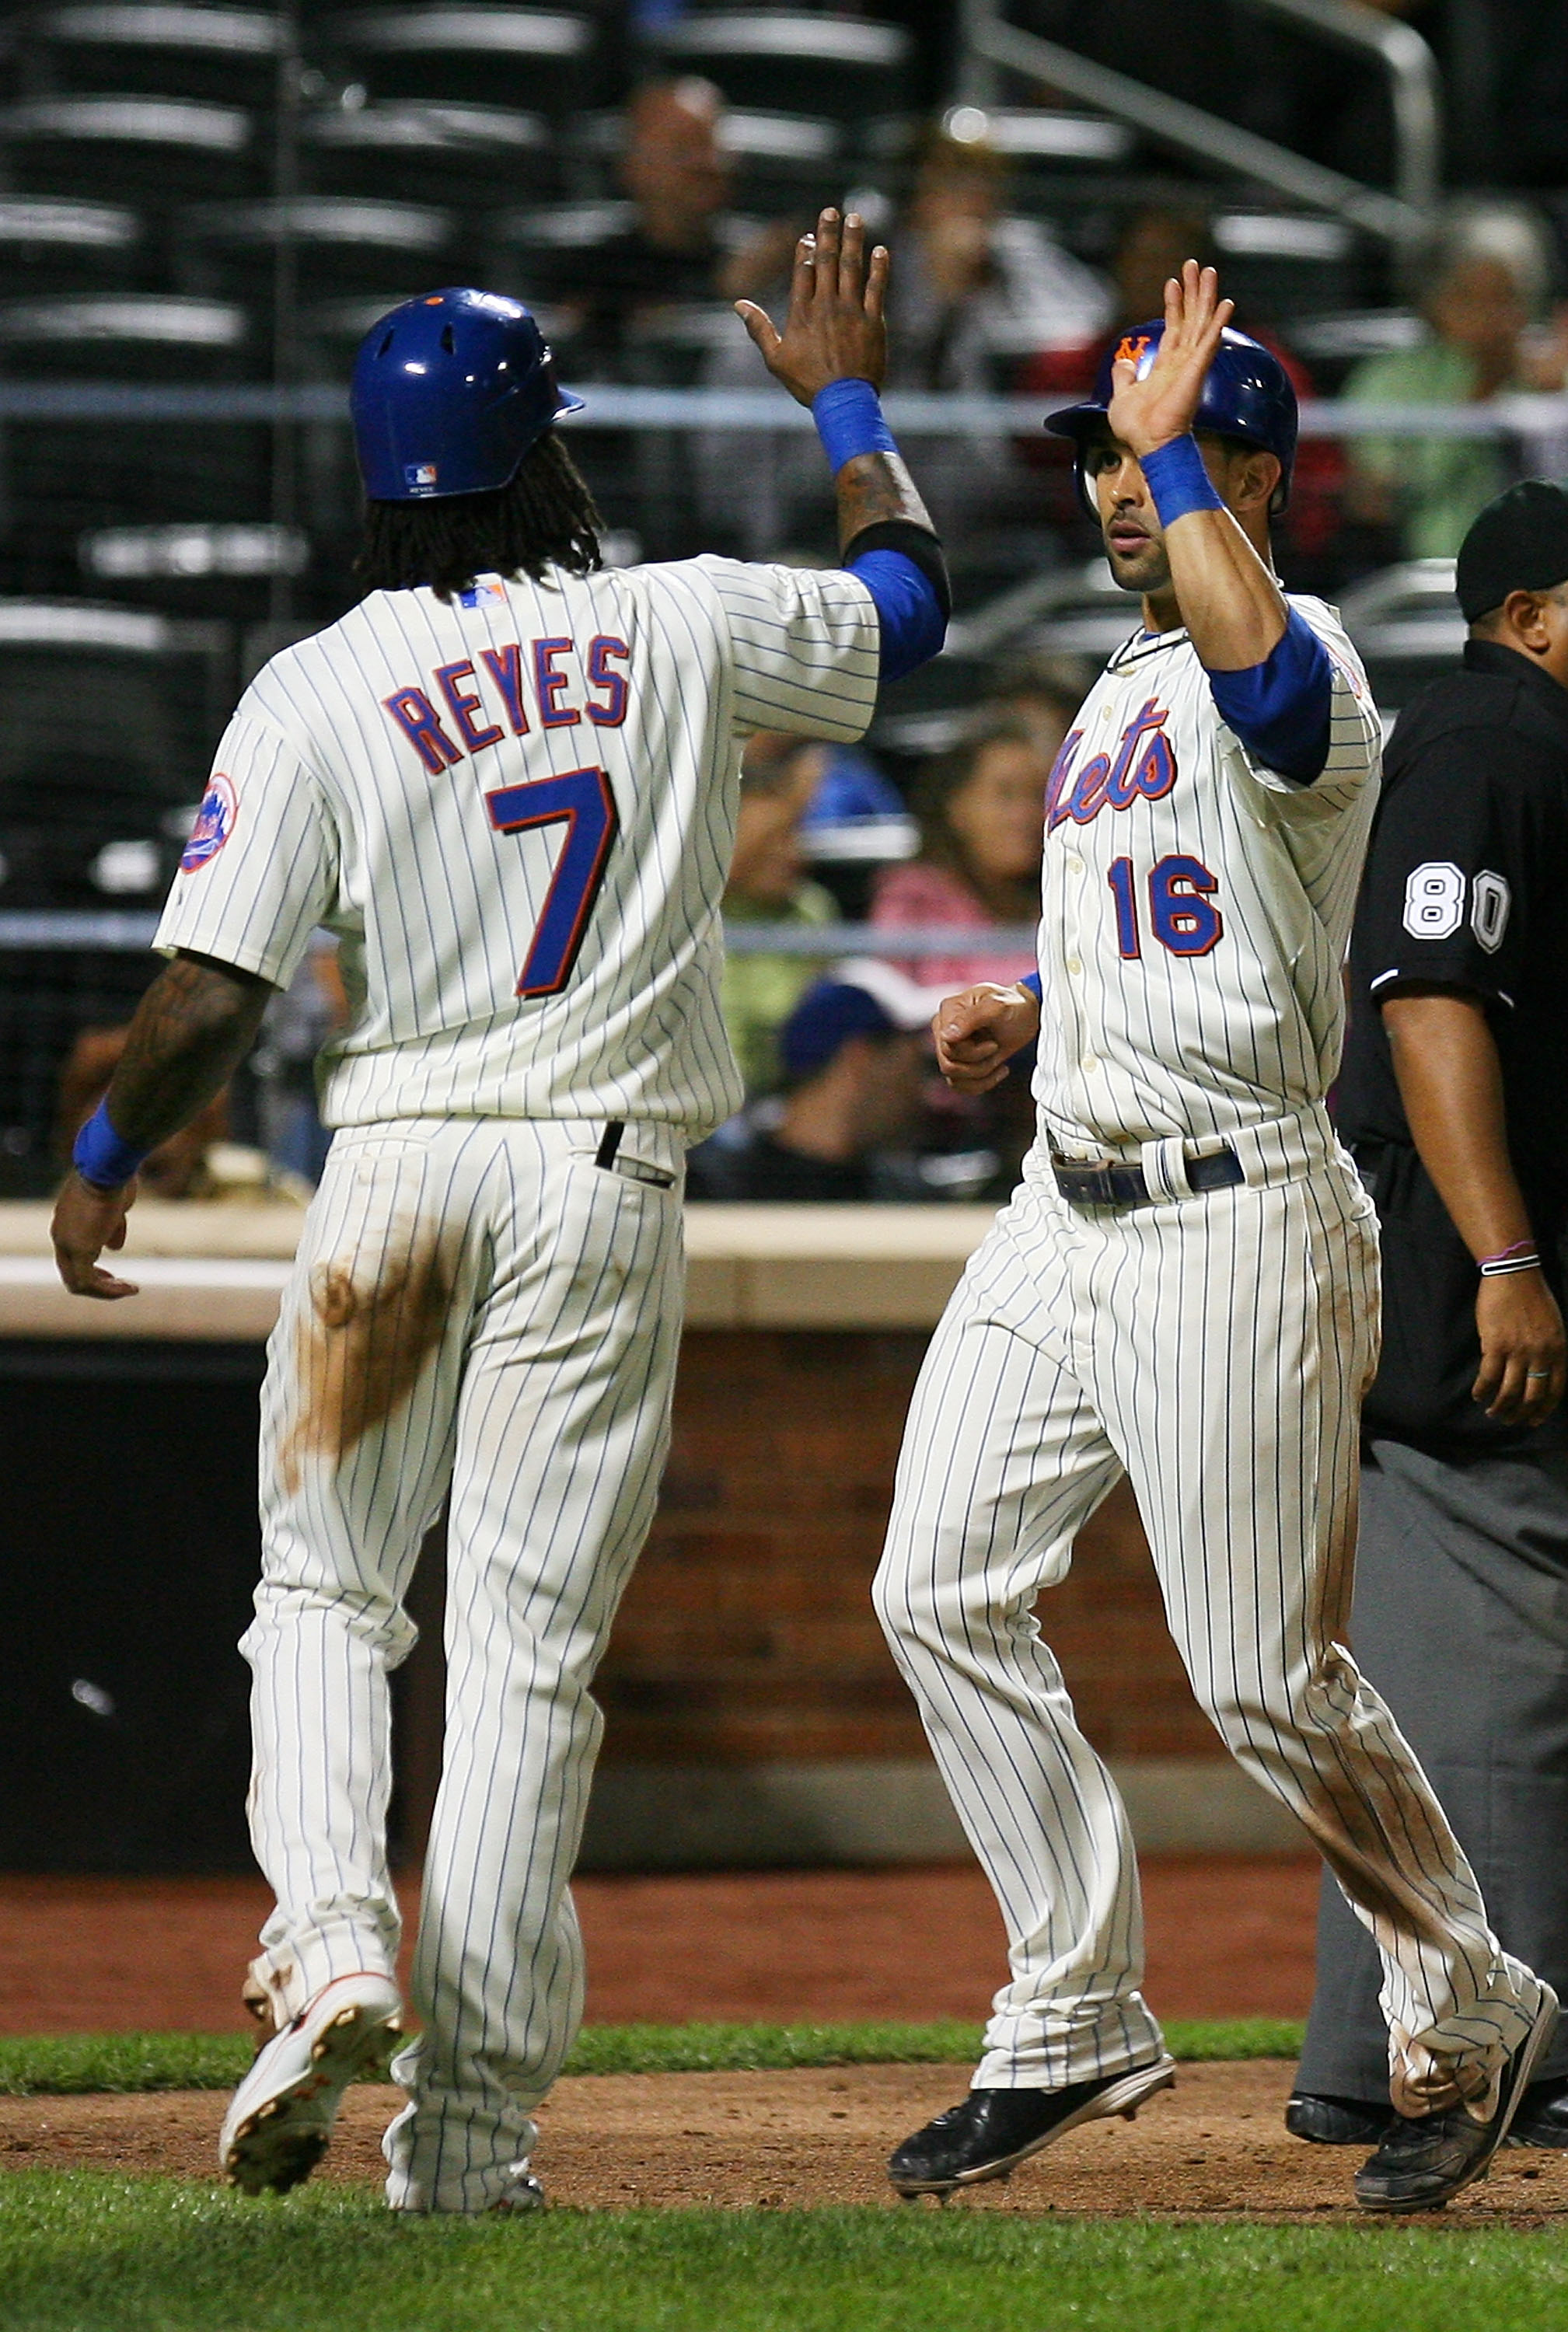 NEW YORK - SEPTEMBER 14: Jose Reyes #7 of the of the New York Mets celebrates with temmate Angel Pagan #16 after running in a two-run double from Carlos Beltran #15 (not seen) of the Mets during the fourth inning against Pittsburgh Pirates on September 14